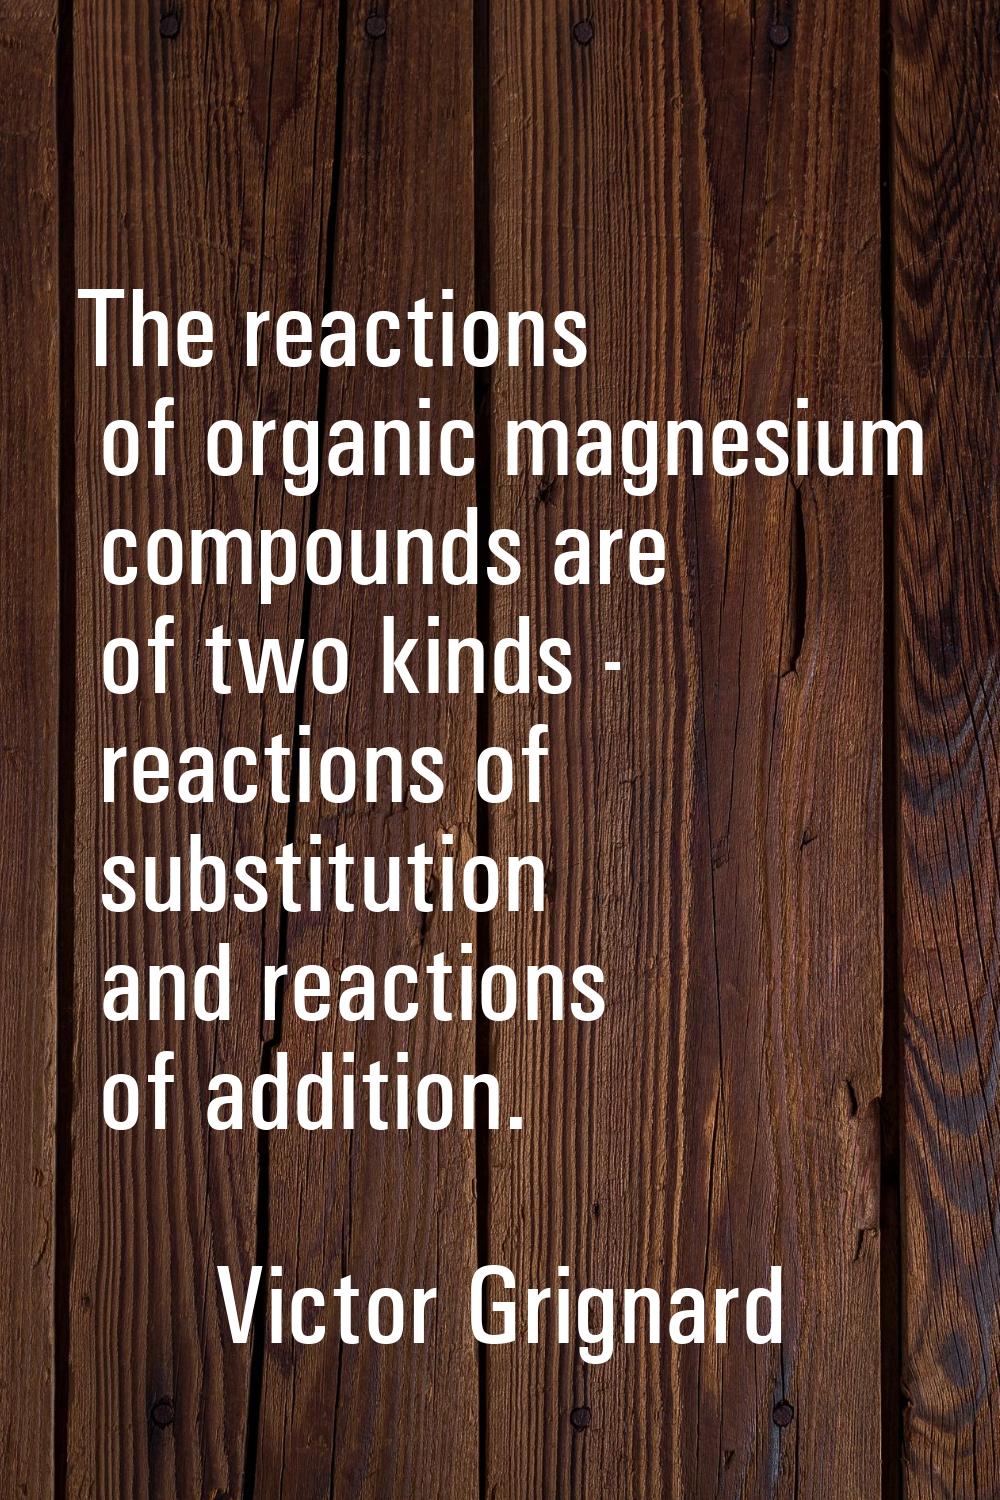 The reactions of organic magnesium compounds are of two kinds - reactions of substitution and react